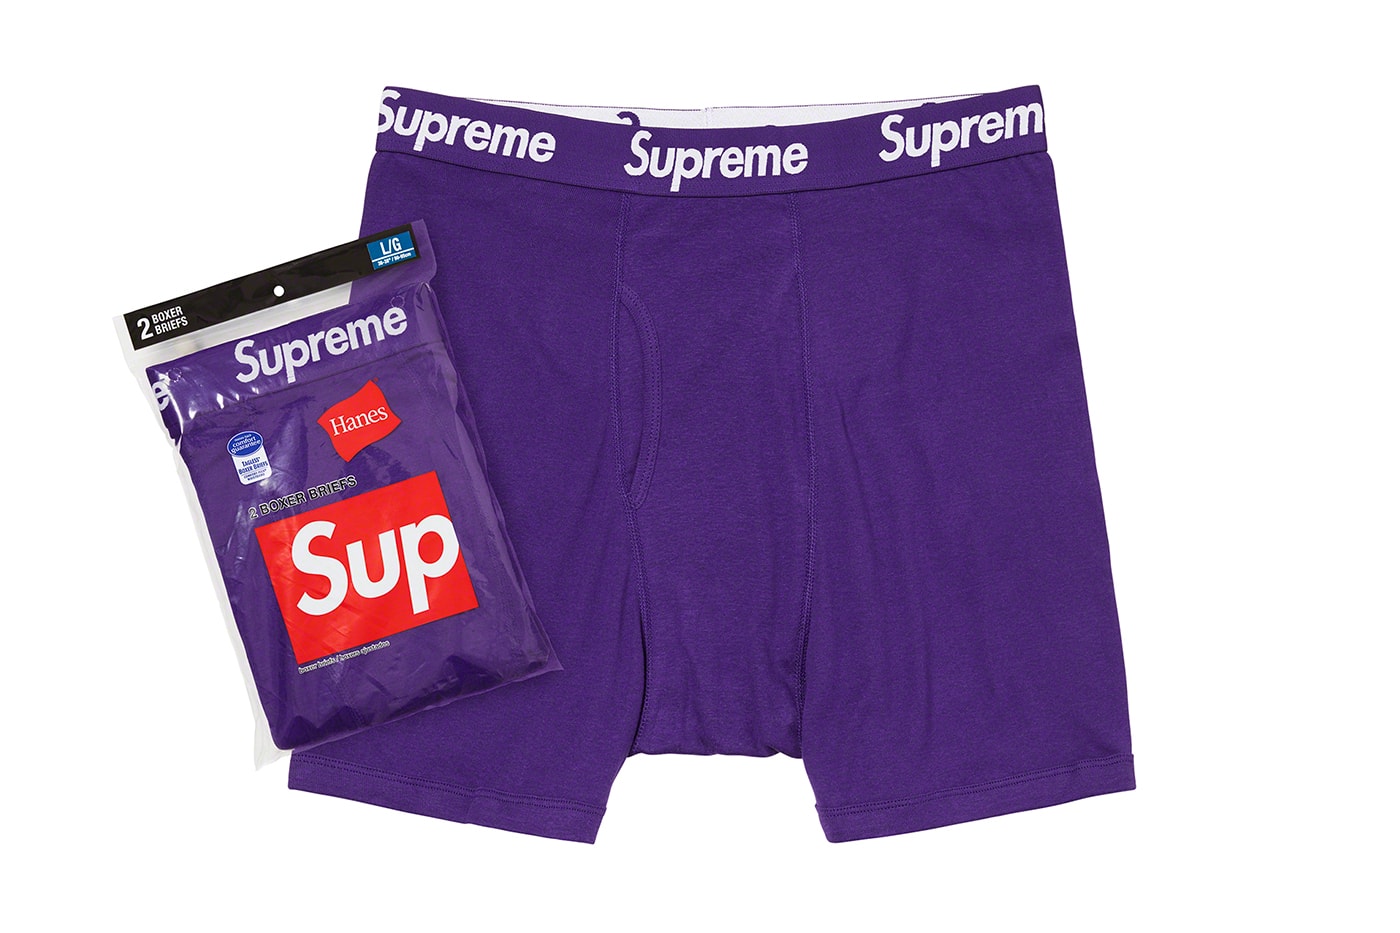 supreme spring summer 2021 ss21 collection drop accessories purple boxers pack